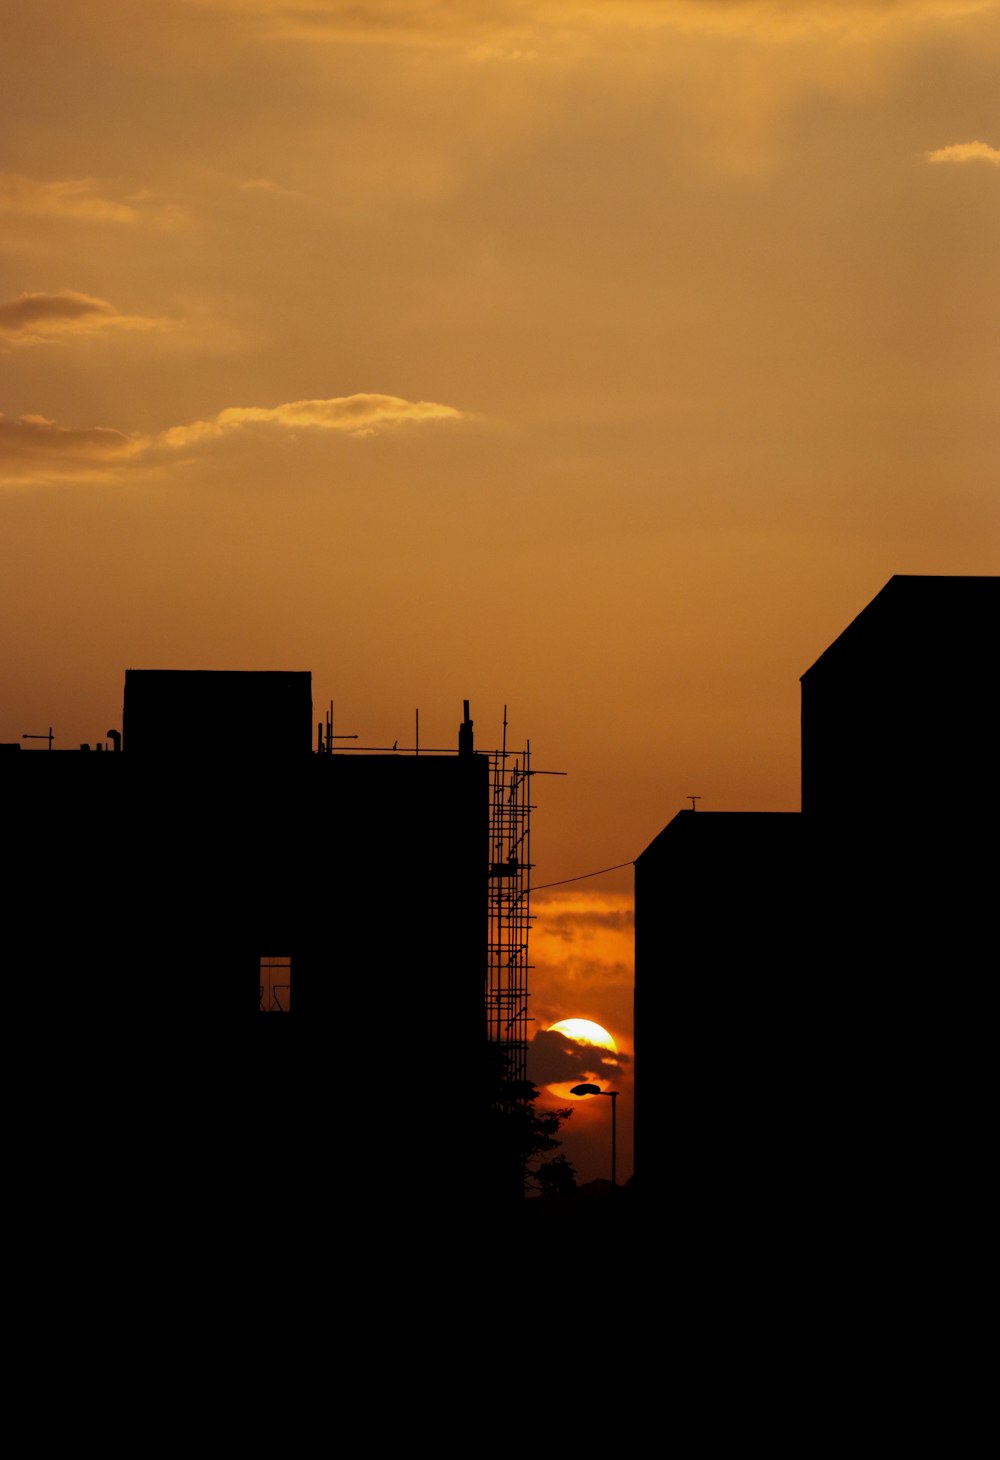 the sun is setting behind some buildings